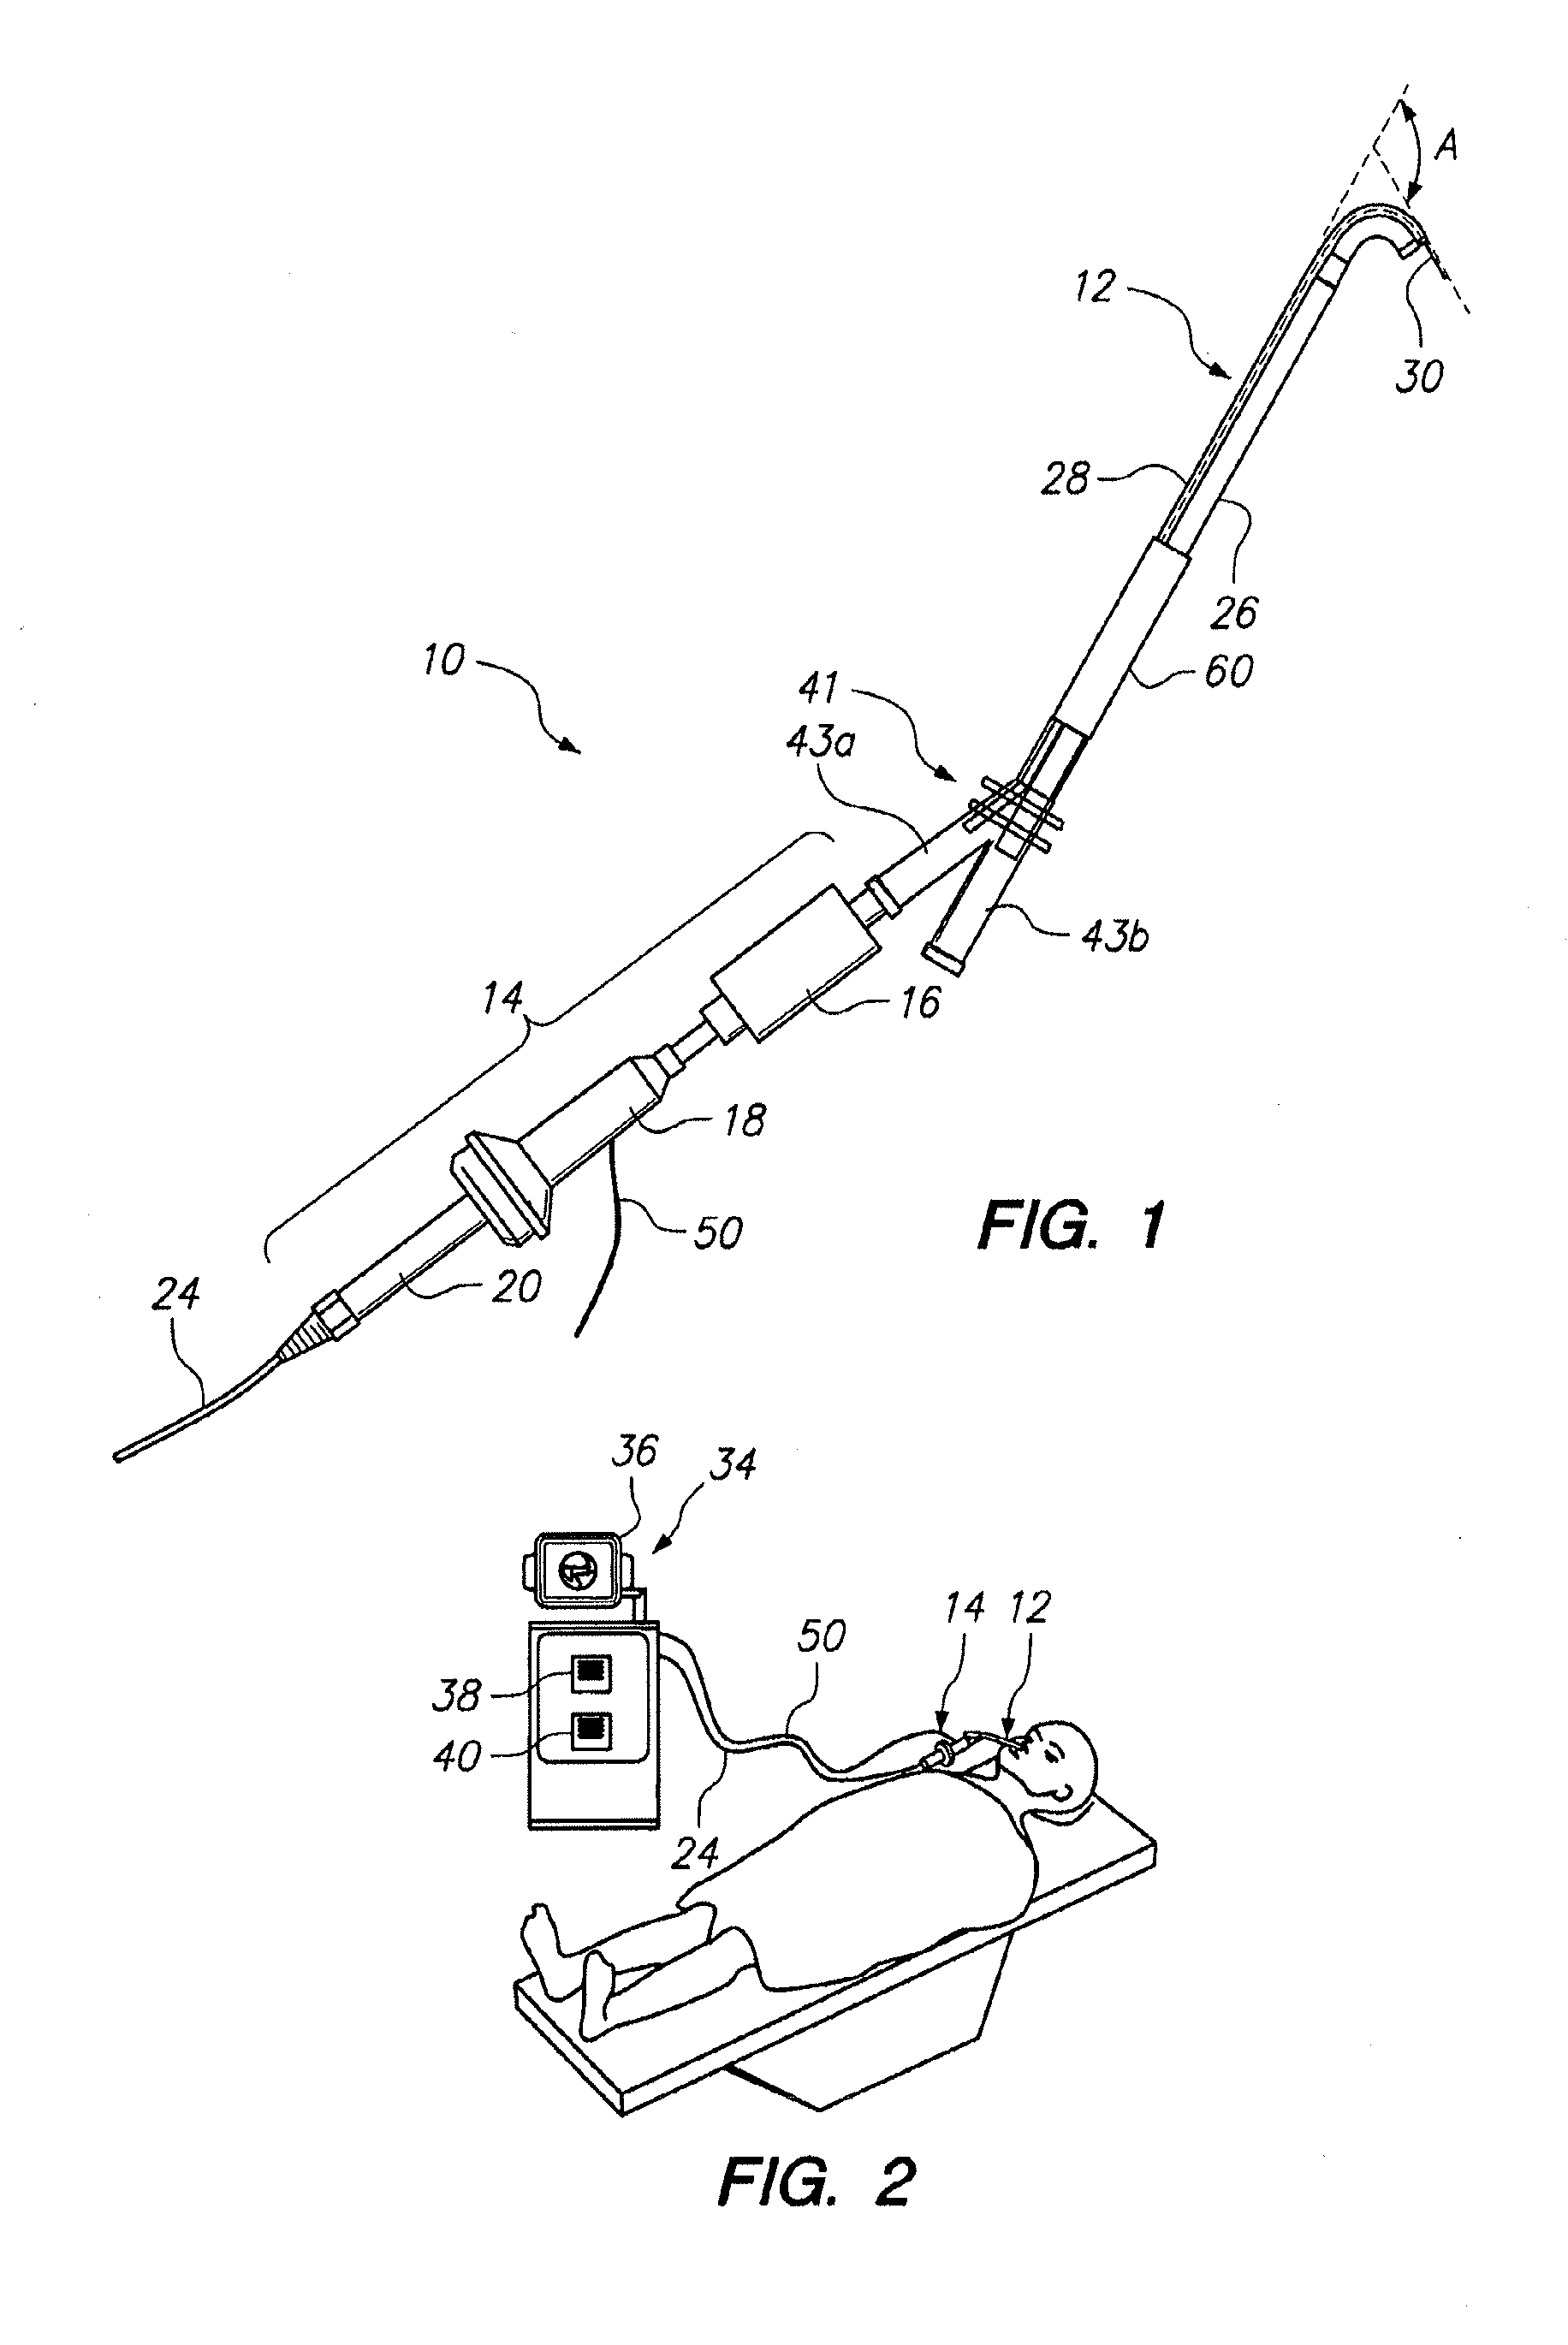 Endoscopic Methods and Devices for Transnasal Procedures